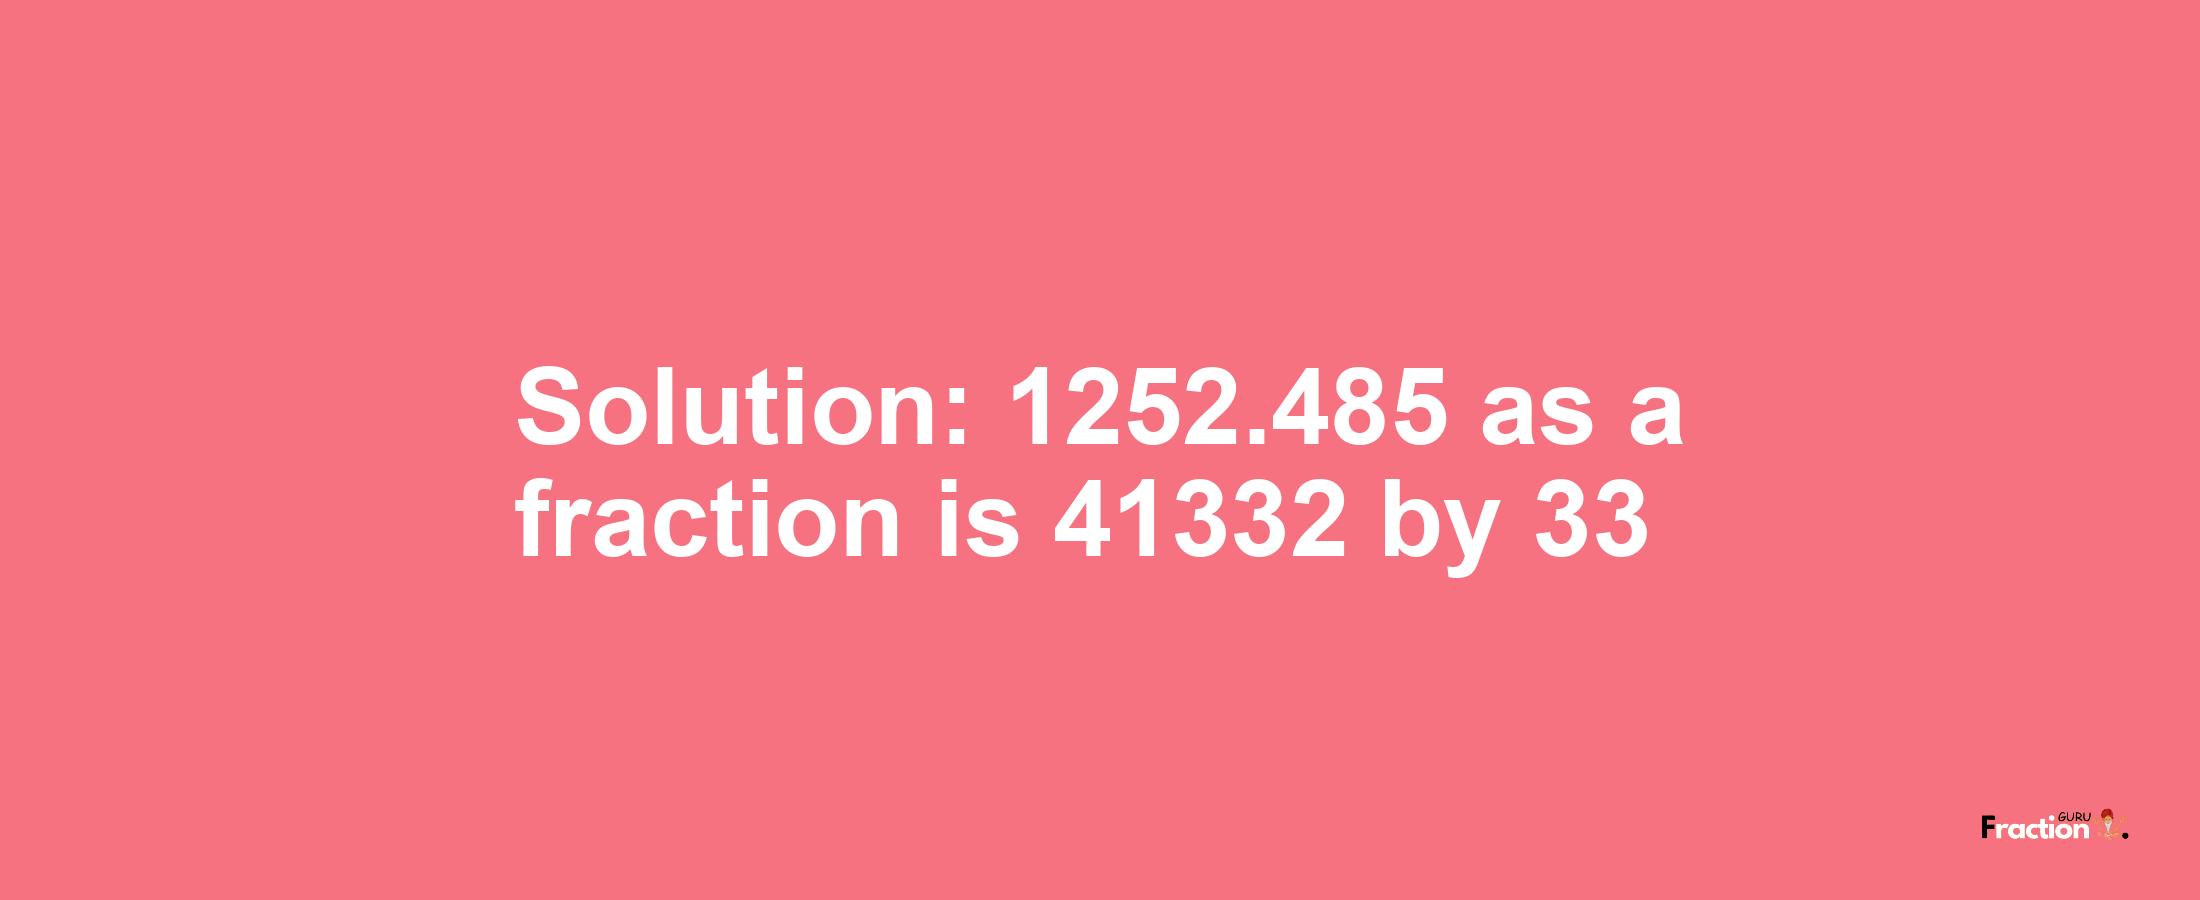 Solution:1252.485 as a fraction is 41332/33